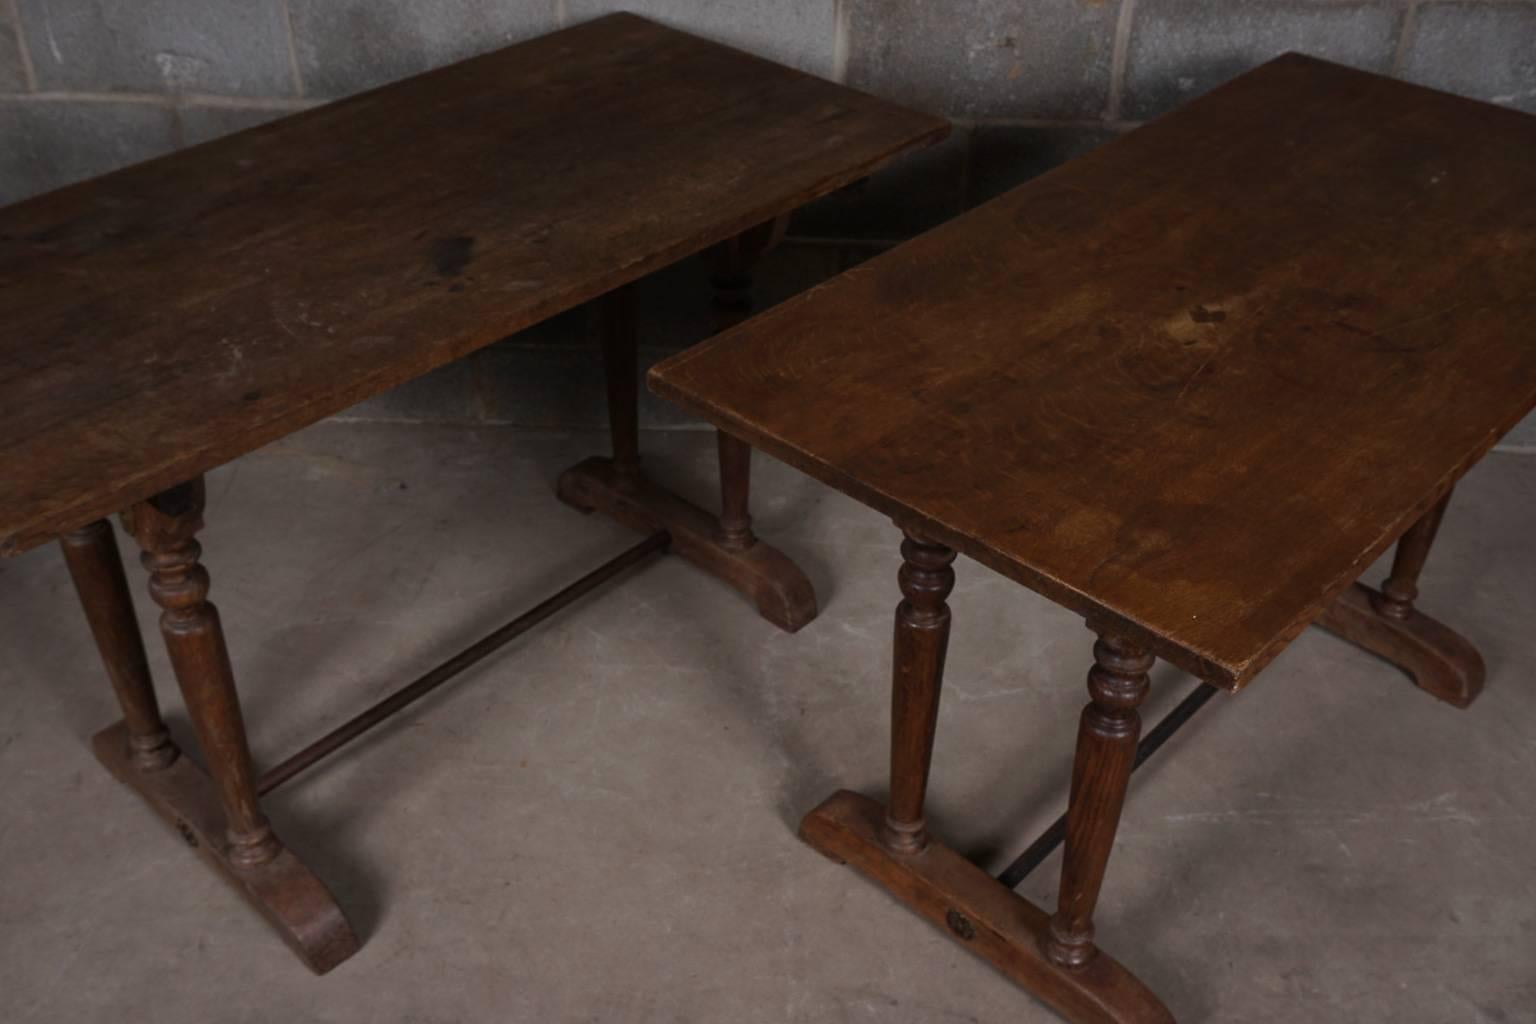 Pair of French bistro tables in oak. Original metal support connects base at the bottom. Nice, lightly used patina.